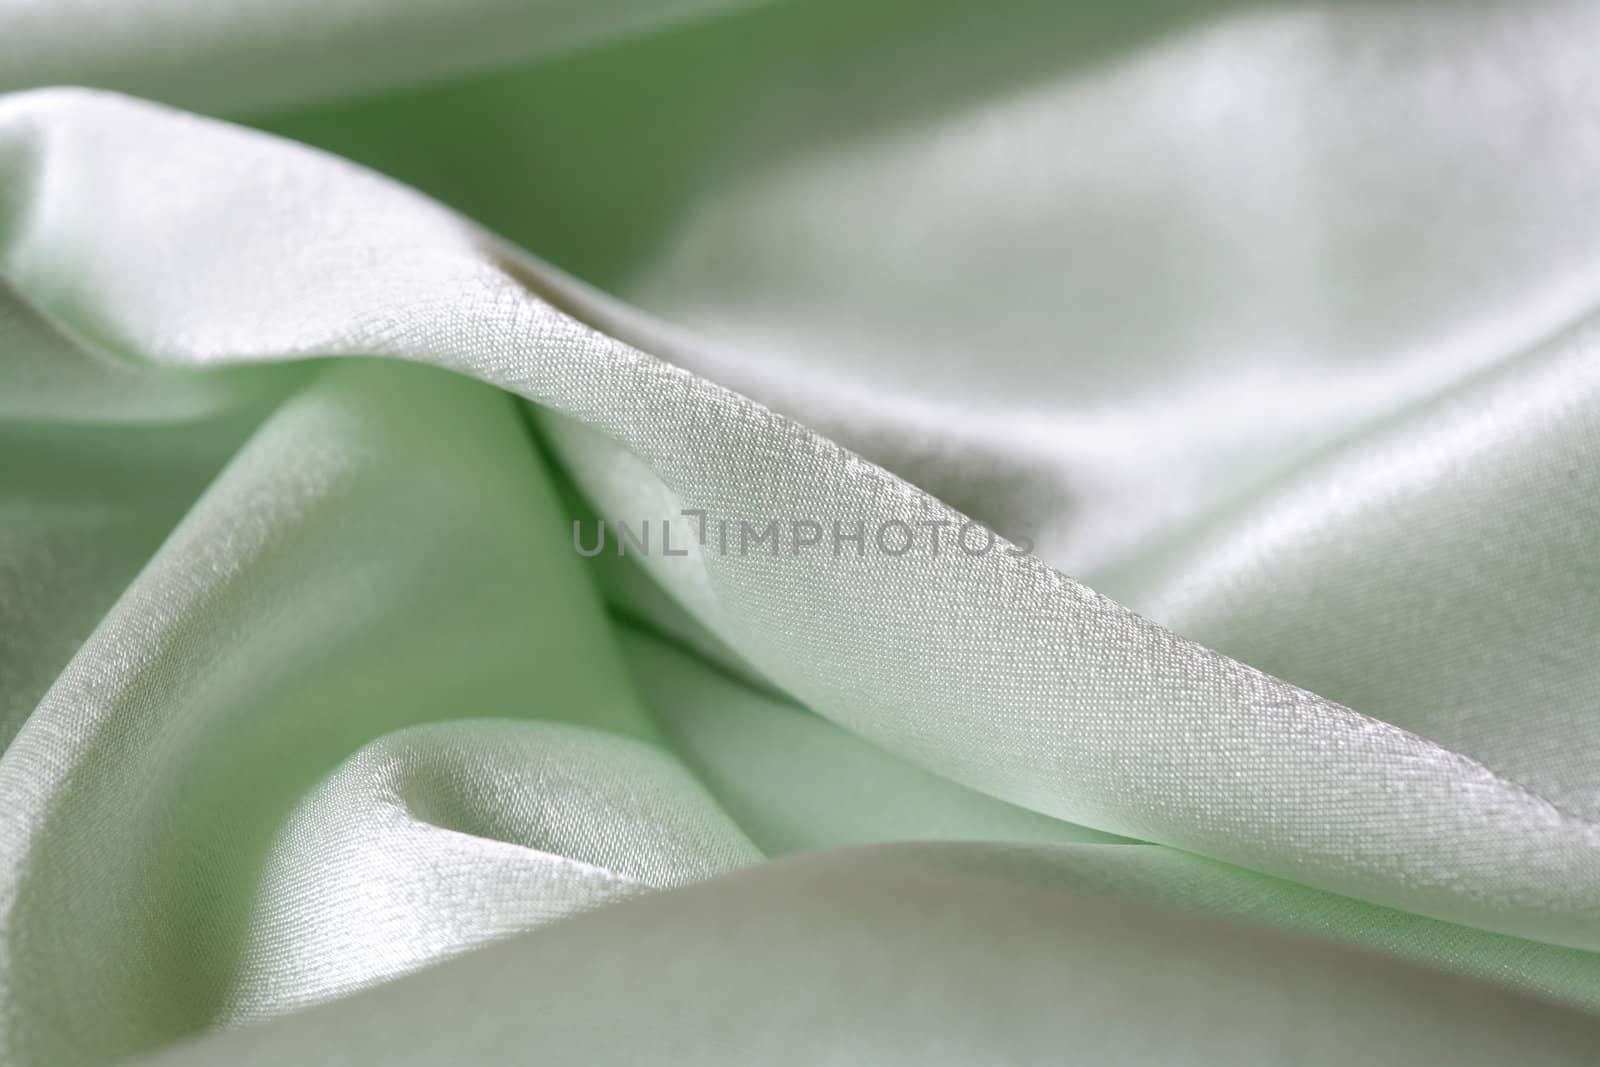 An image of folds of green shine fabric